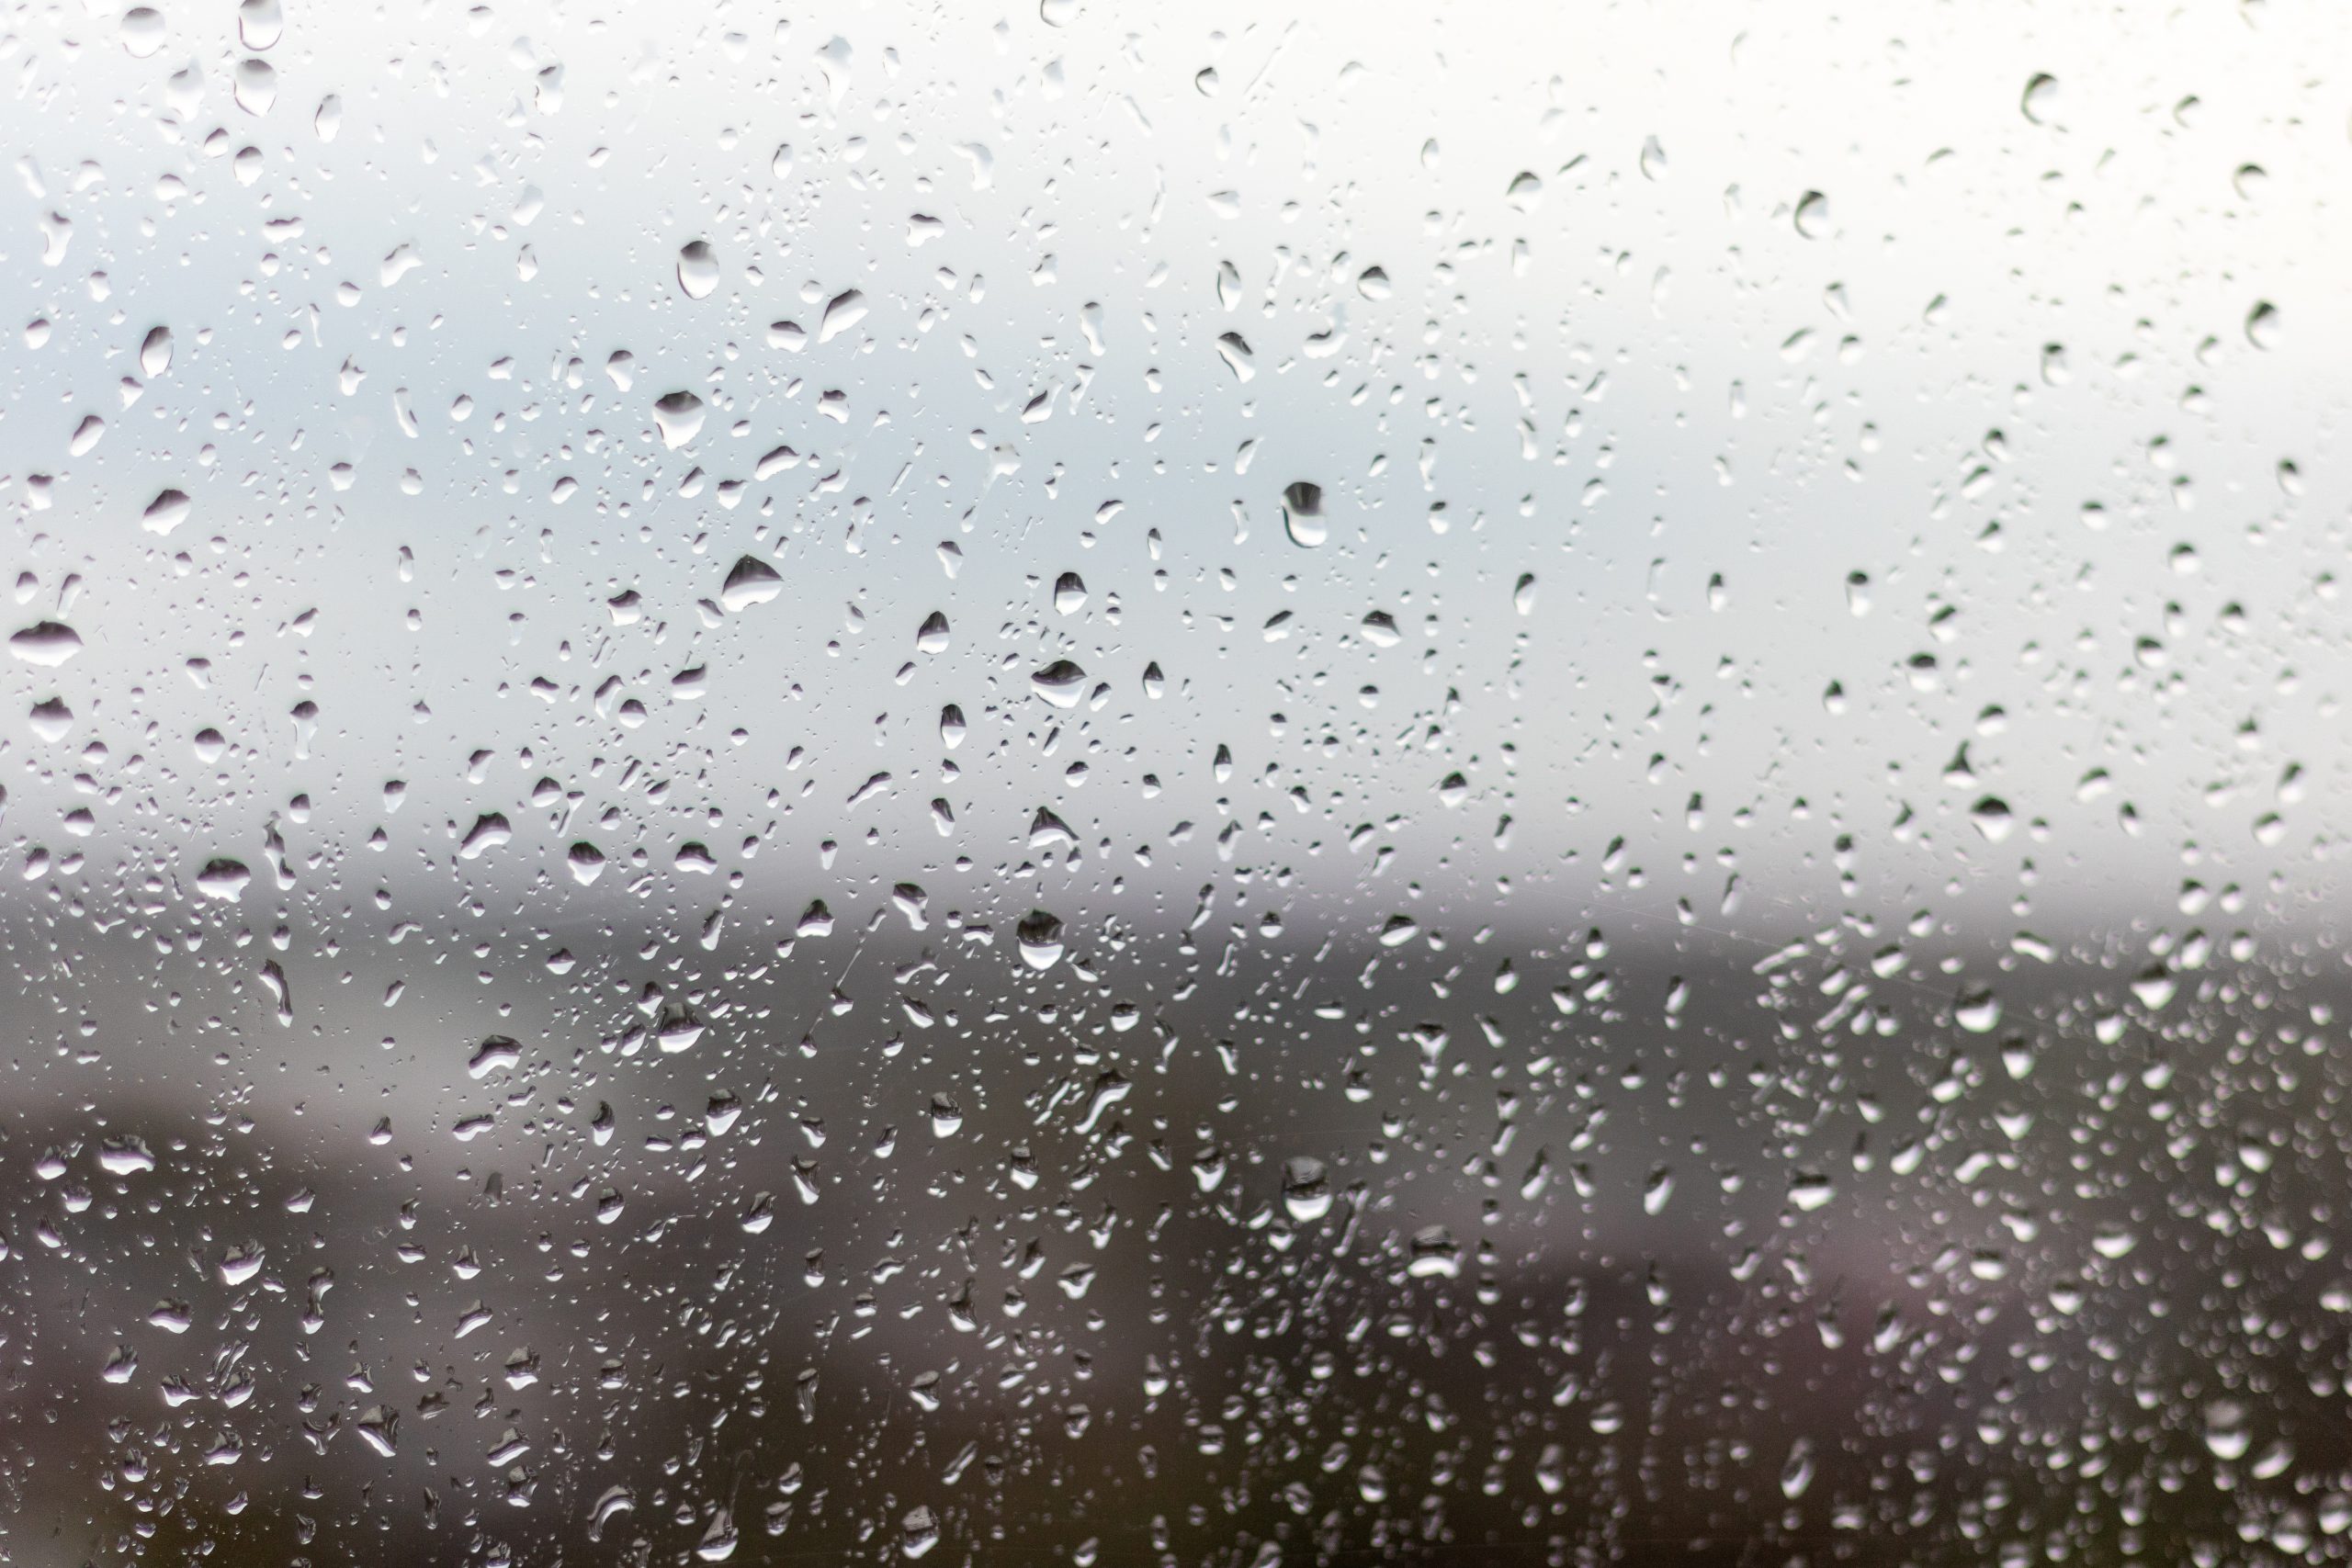 closeup-shot-of-a-window-on-a-rainy-day-raindrops-rolling-down-the-window